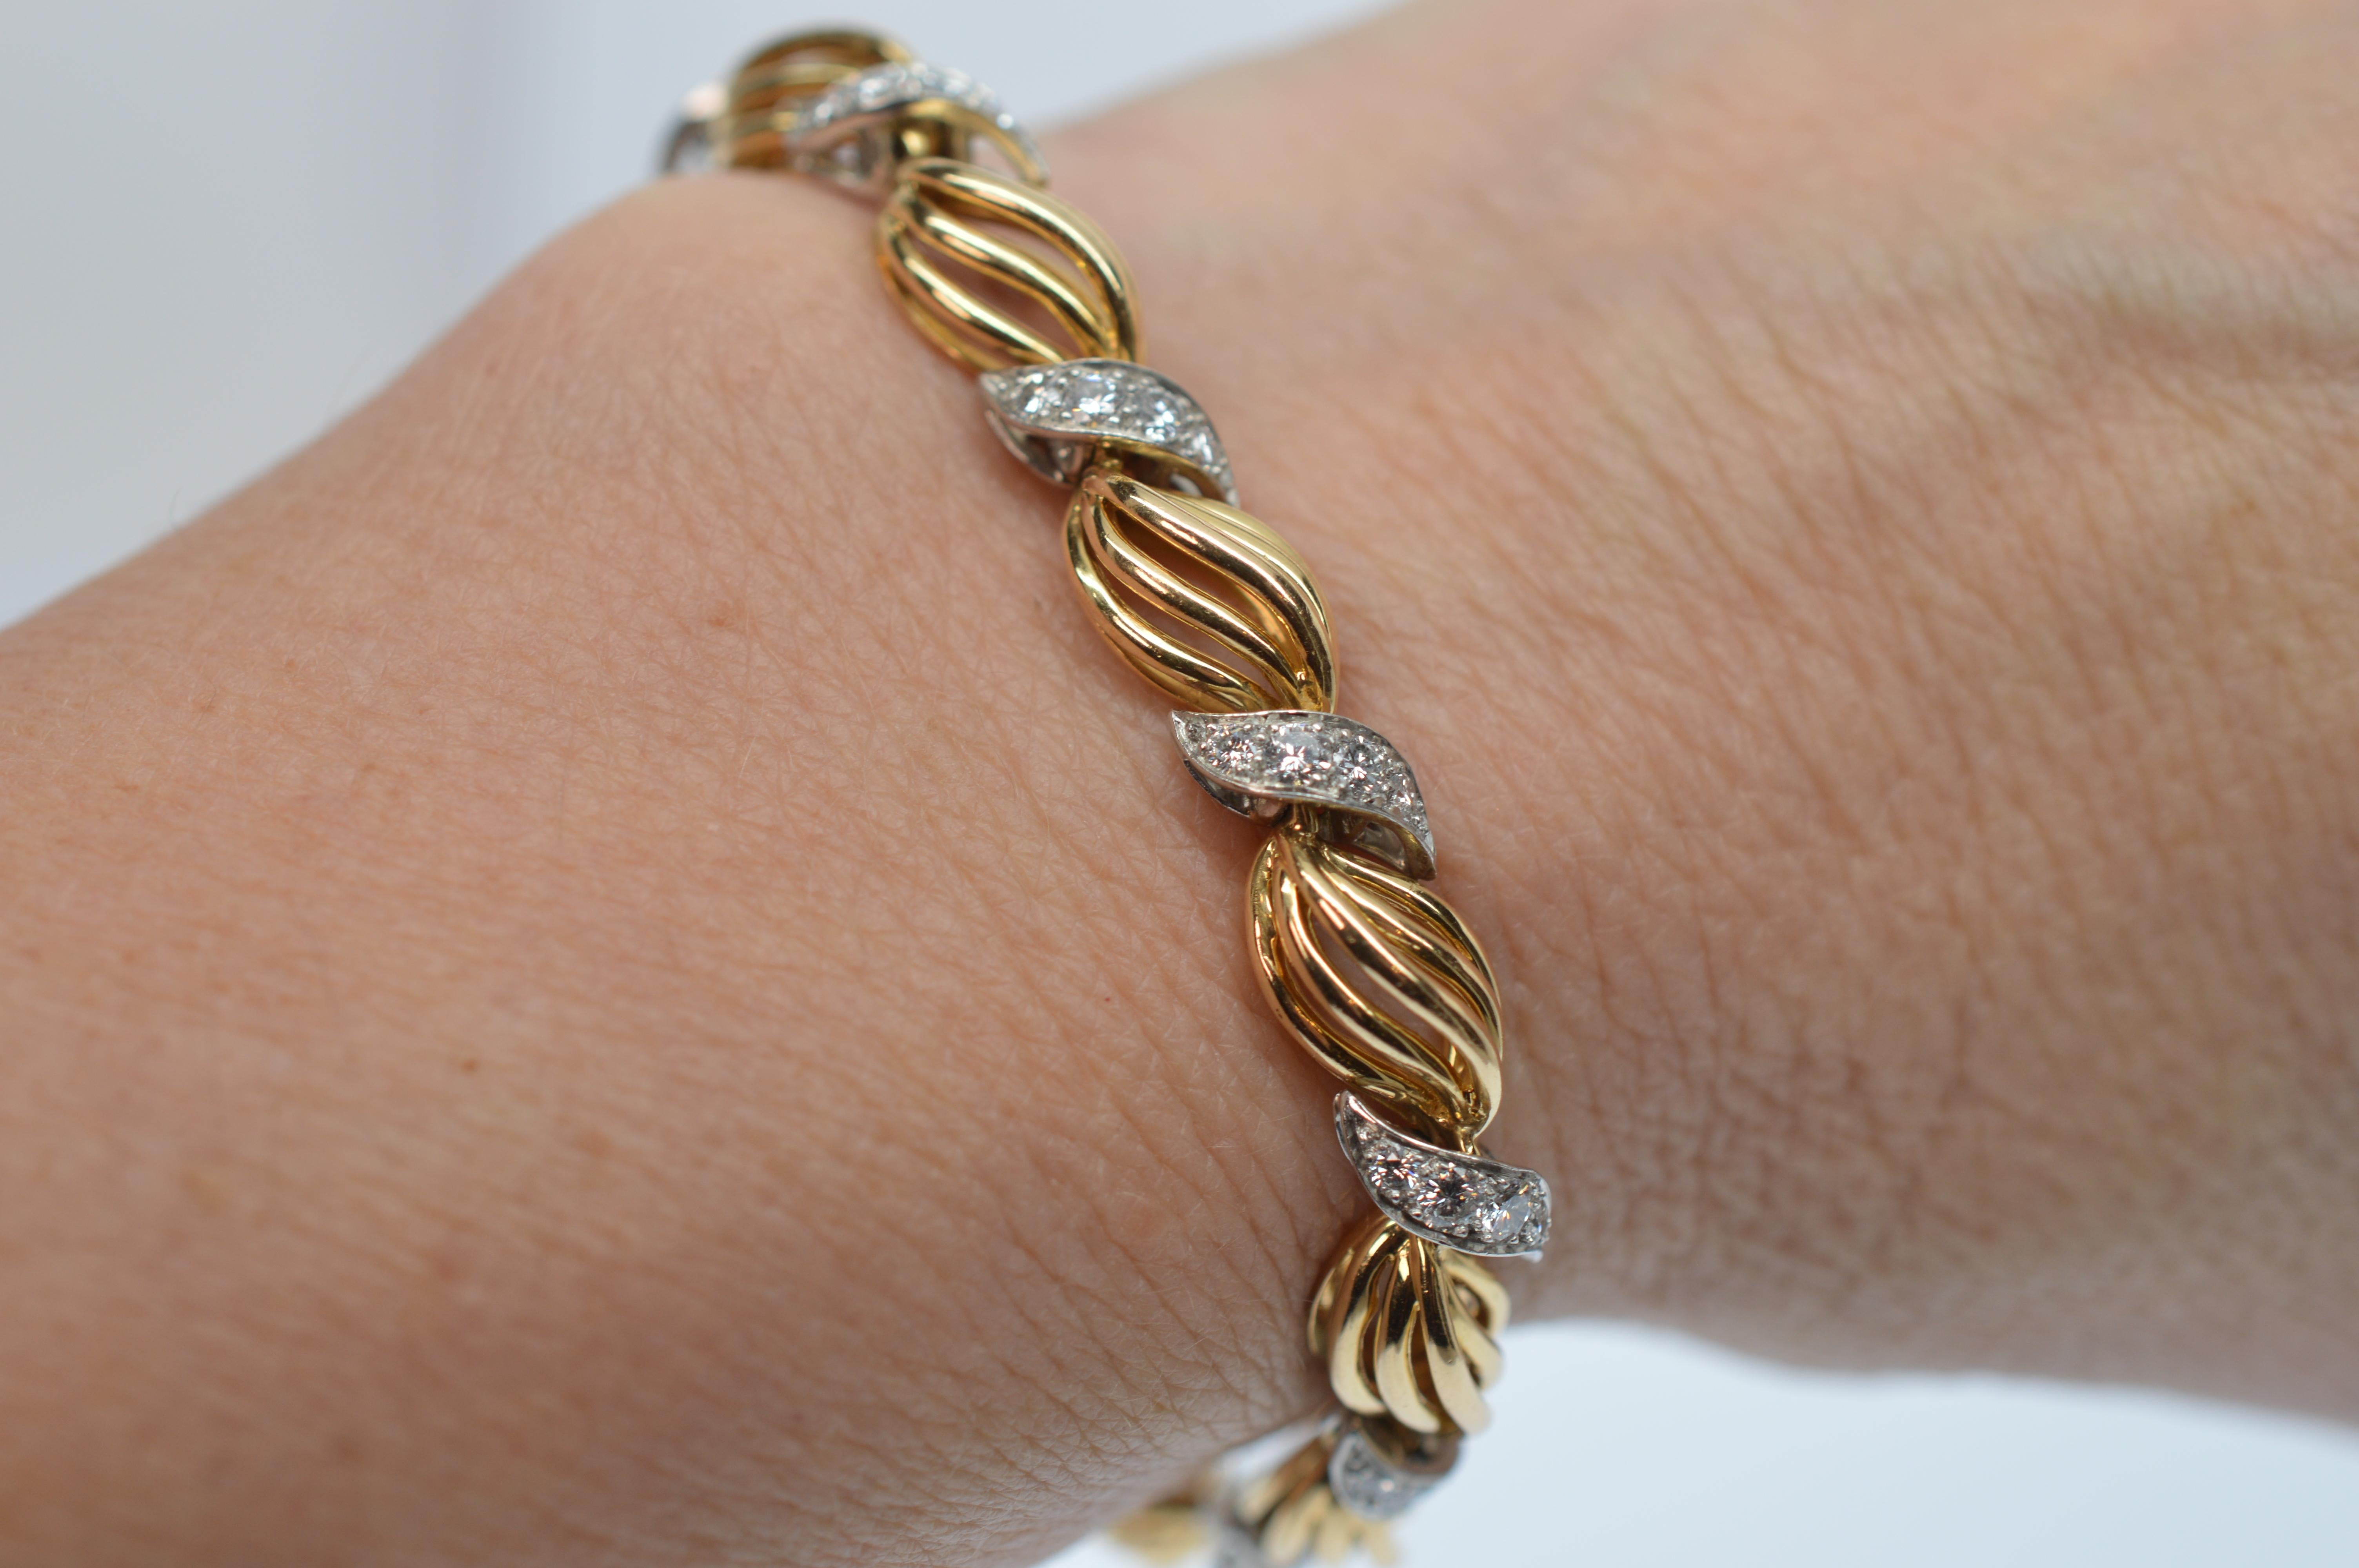 Diamond vignettes adorn this beautifully crafted eighteen karat (18K) yellow gold and platinum retro-style bracelet following in the popular style of Ava & Elizabeth. Measuring seven inches in length and 3/8 in width, the bold 18 karat yellow gold